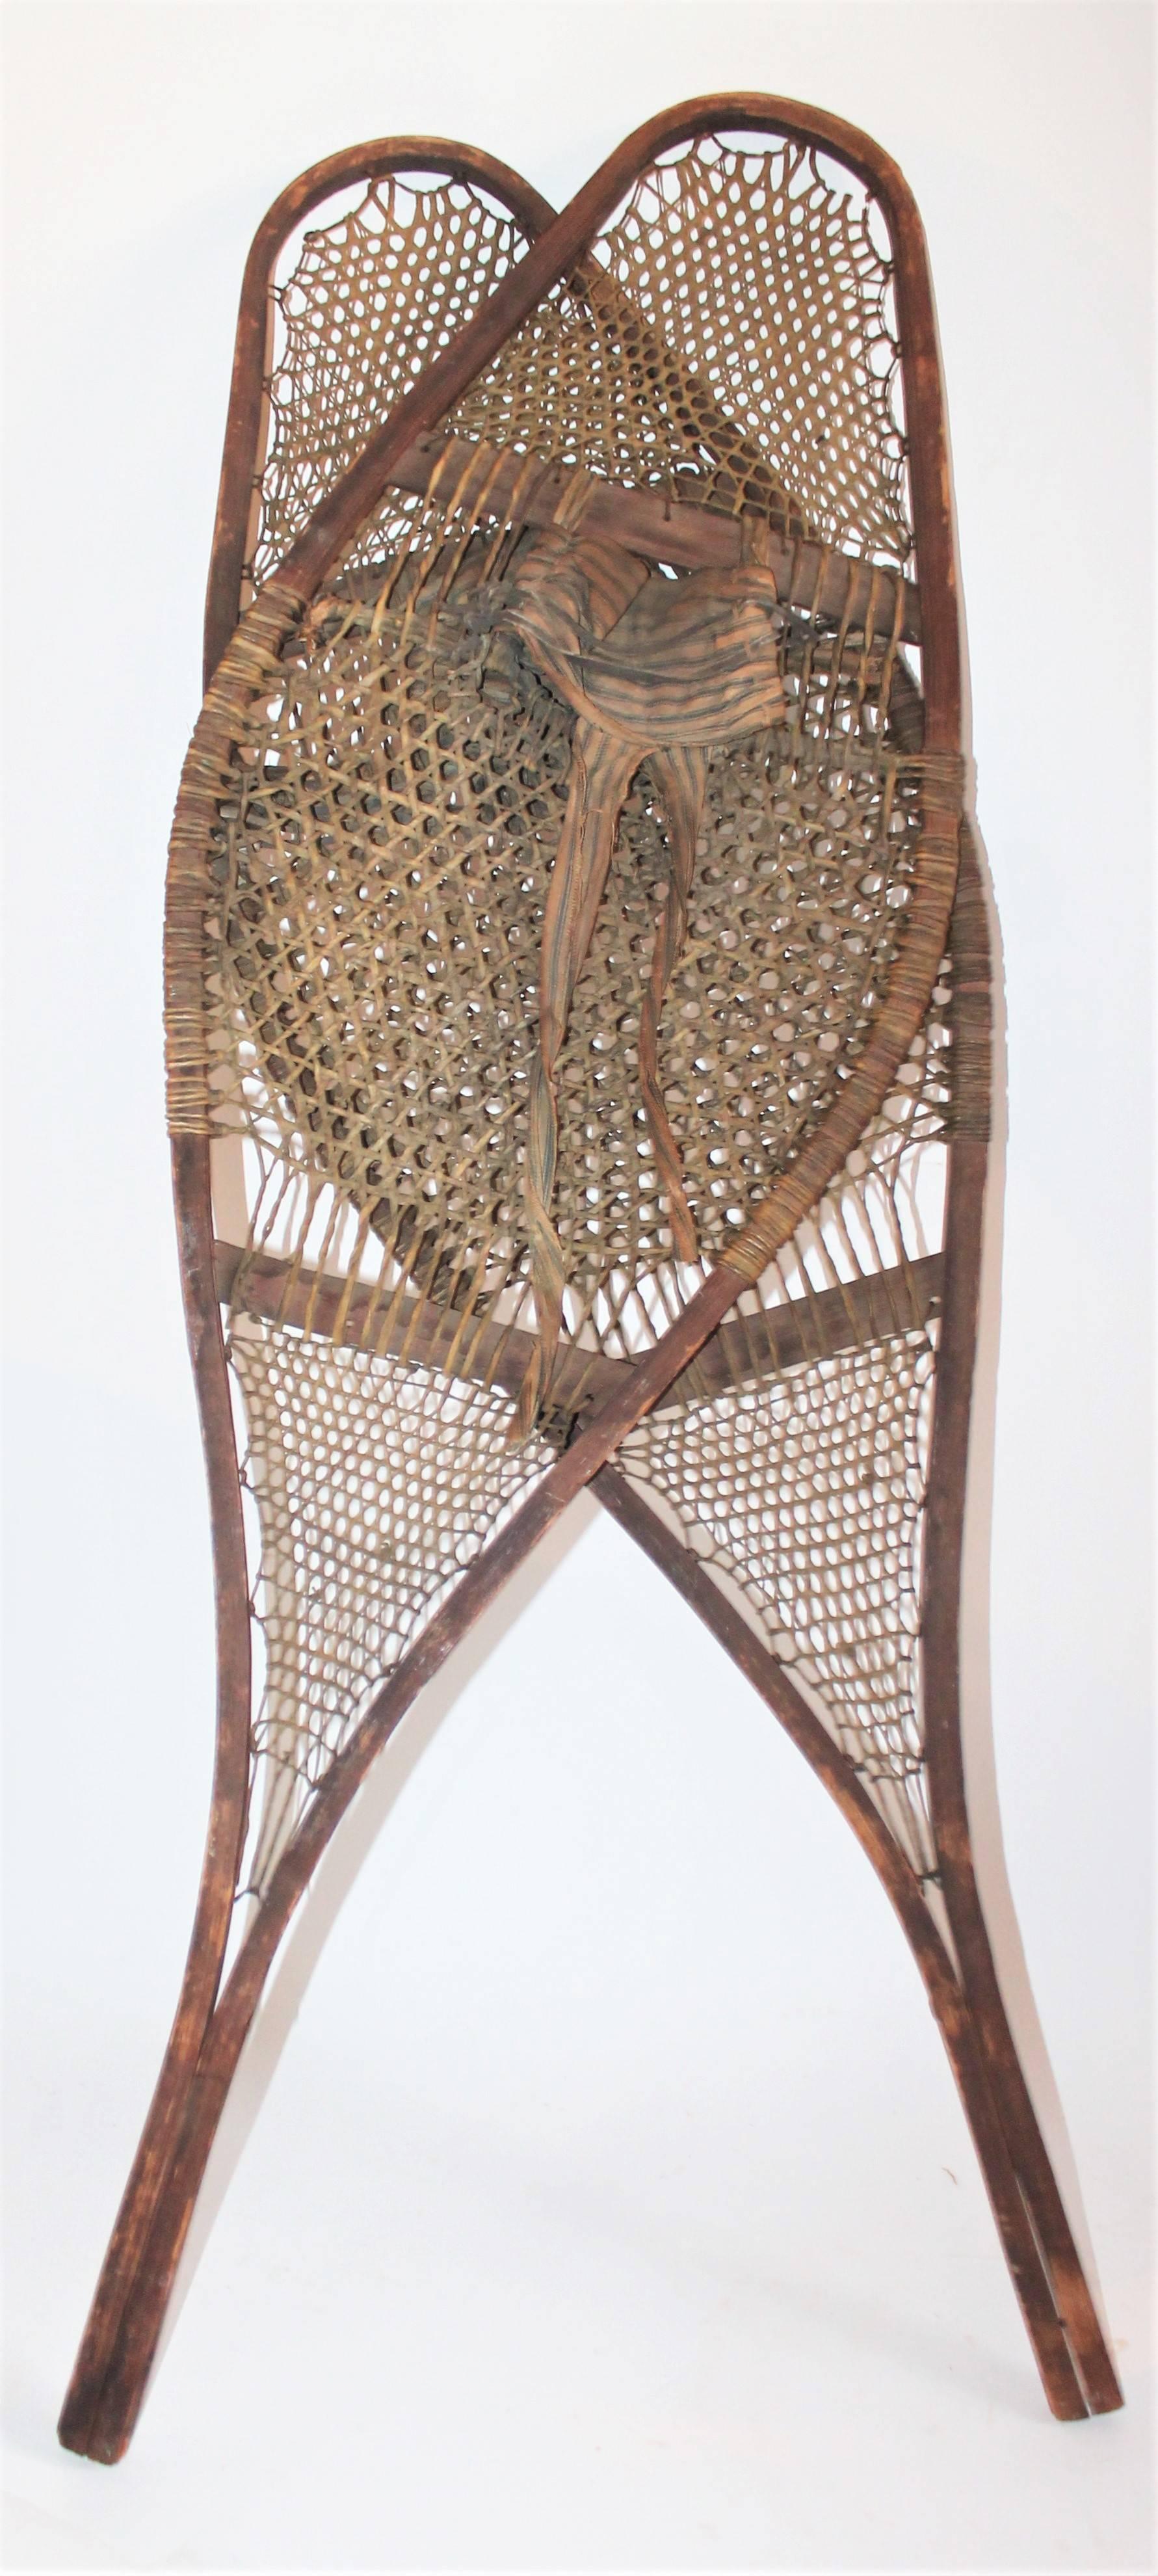 These amazing handmade rawhide and wood snowshoes were found in the State of Maine. Probably originally made in Canada. There are fabric / ticking ties in the center of these shoes.